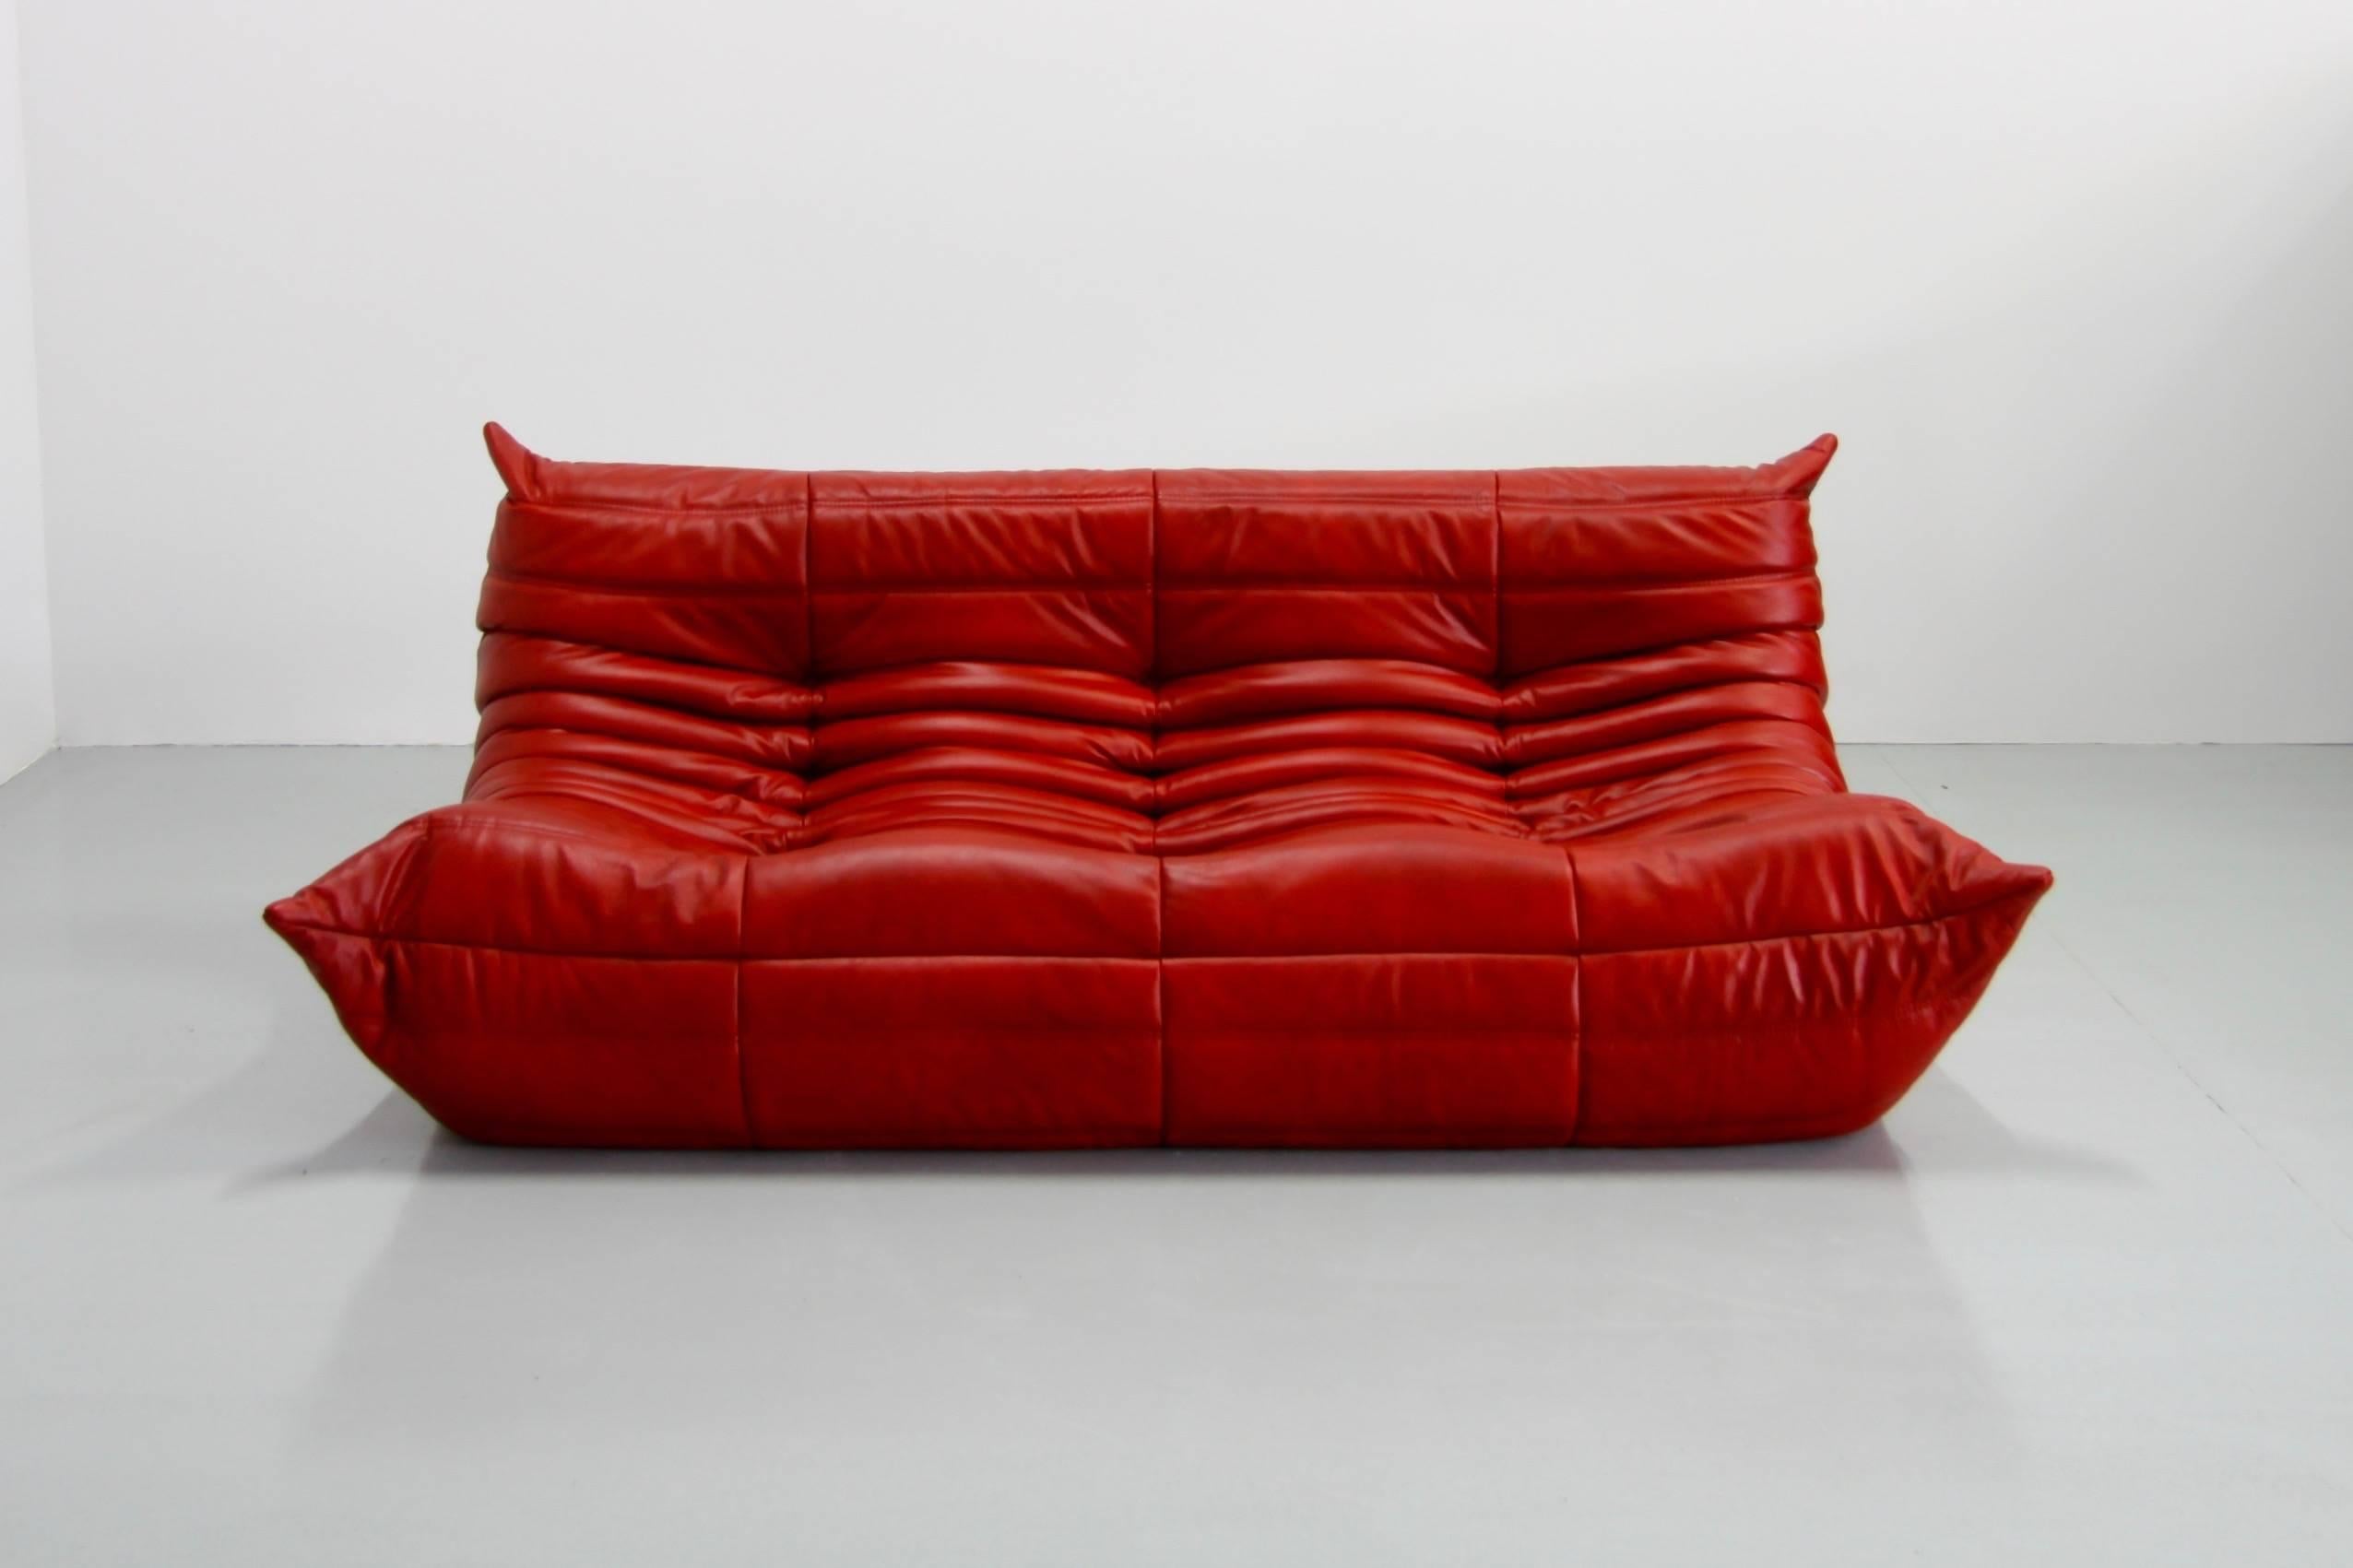 Late 20th Century Red Leather Togo Sofa by Michel Ducaroy for Ligne Roset, 1974, Red Leather Togo